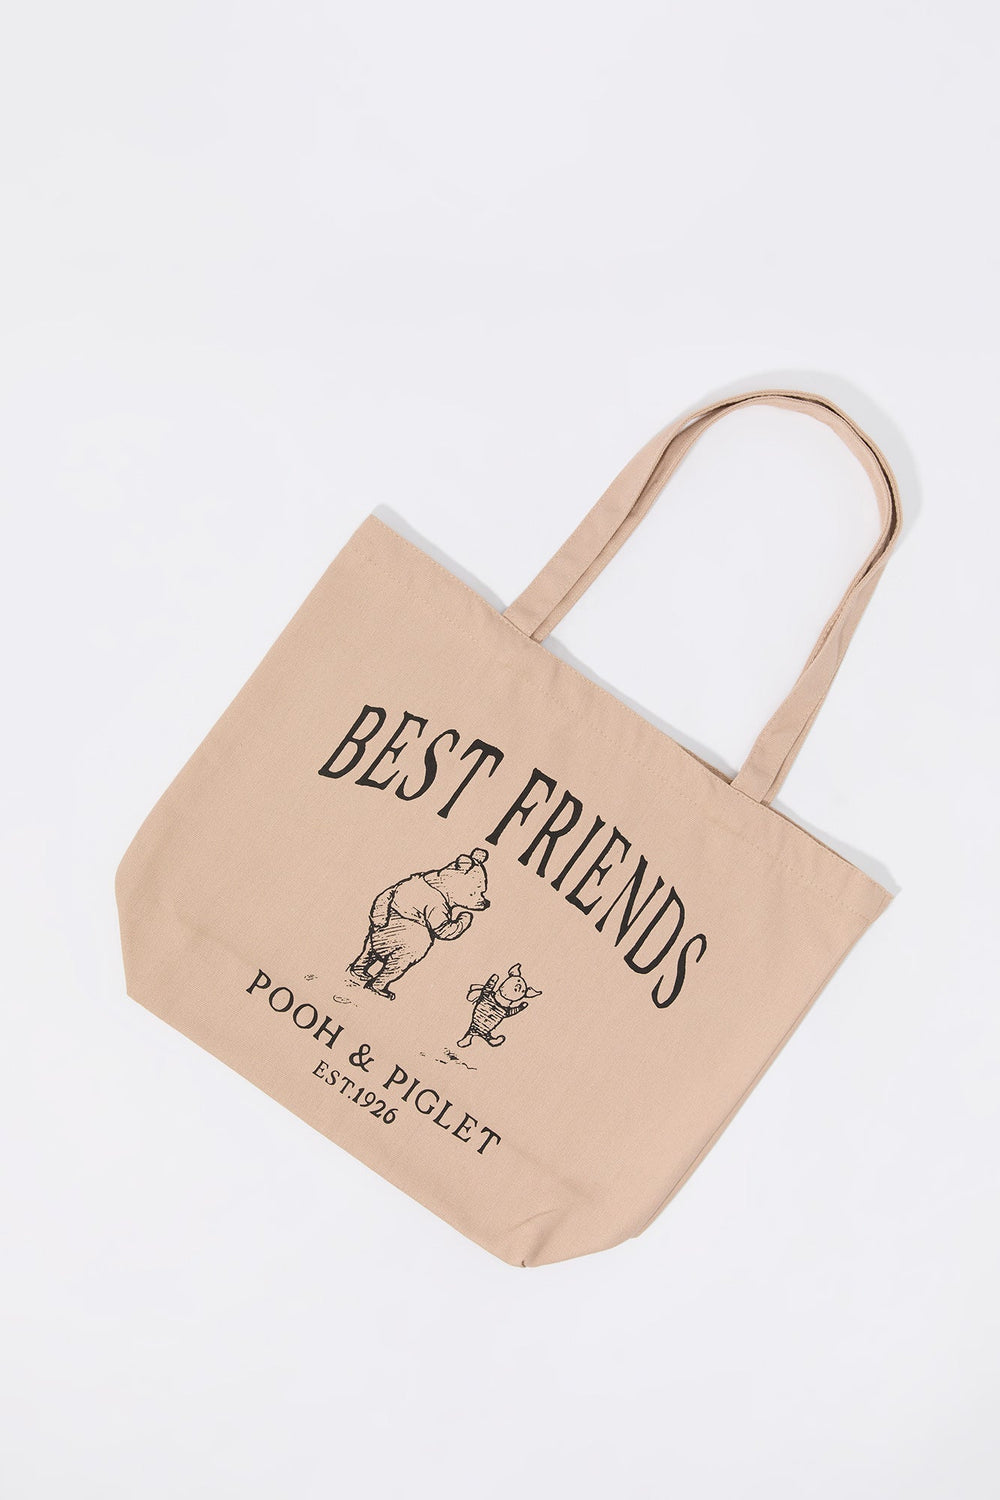 Pooh and Piglet Graphic Tote Bag Pooh and Piglet Graphic Tote Bag 1